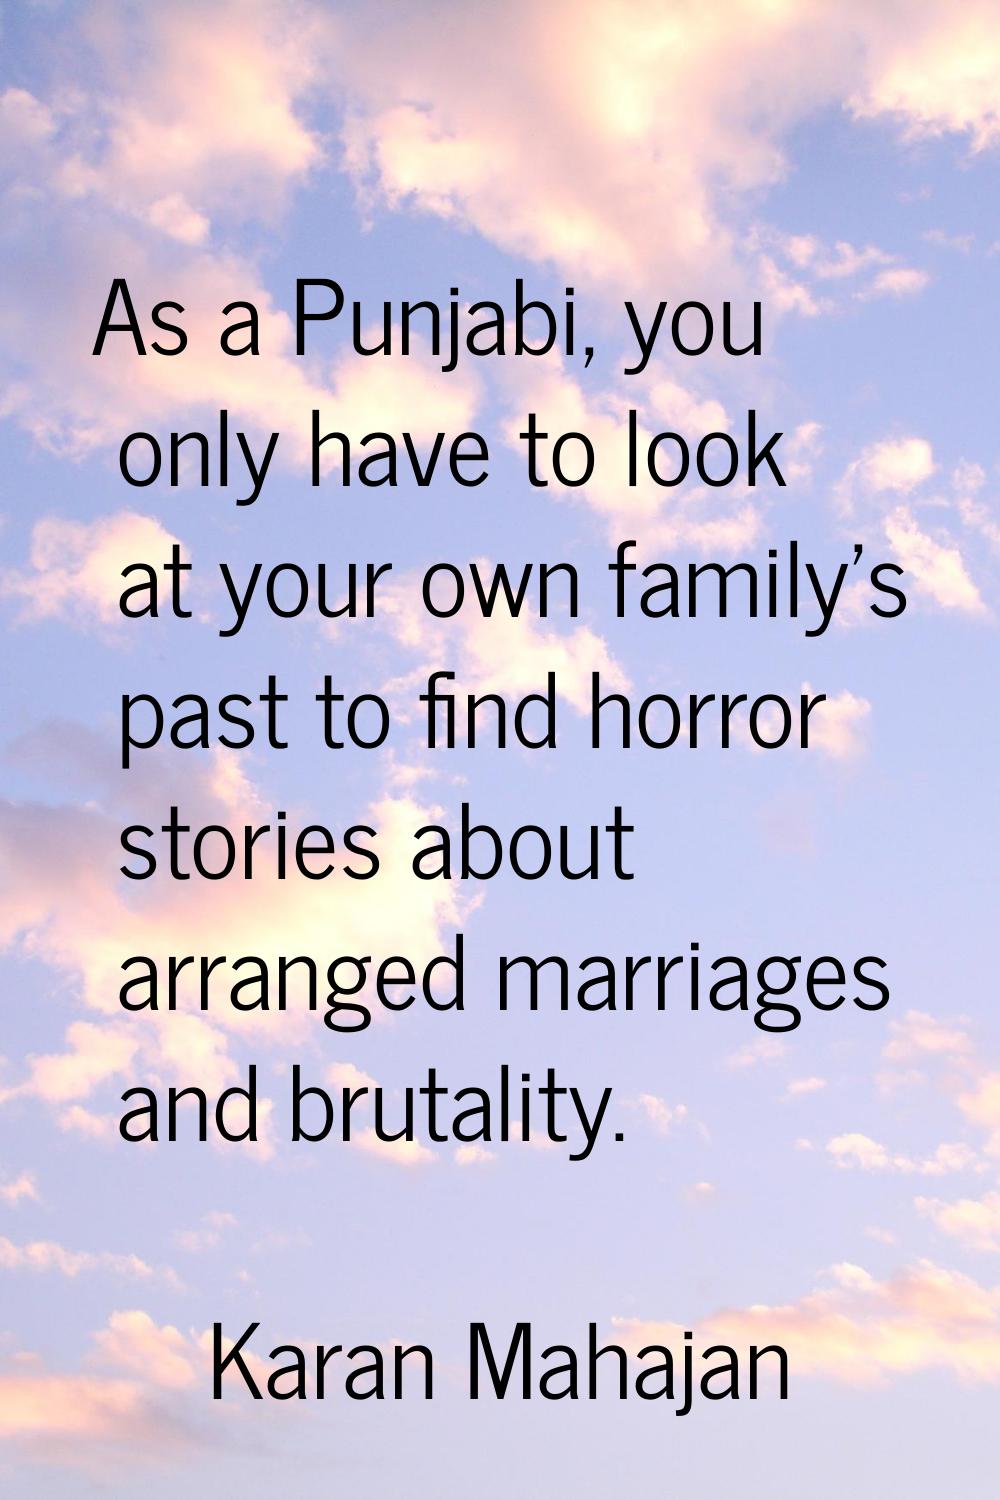 As a Punjabi, you only have to look at your own family's past to find horror stories about arranged